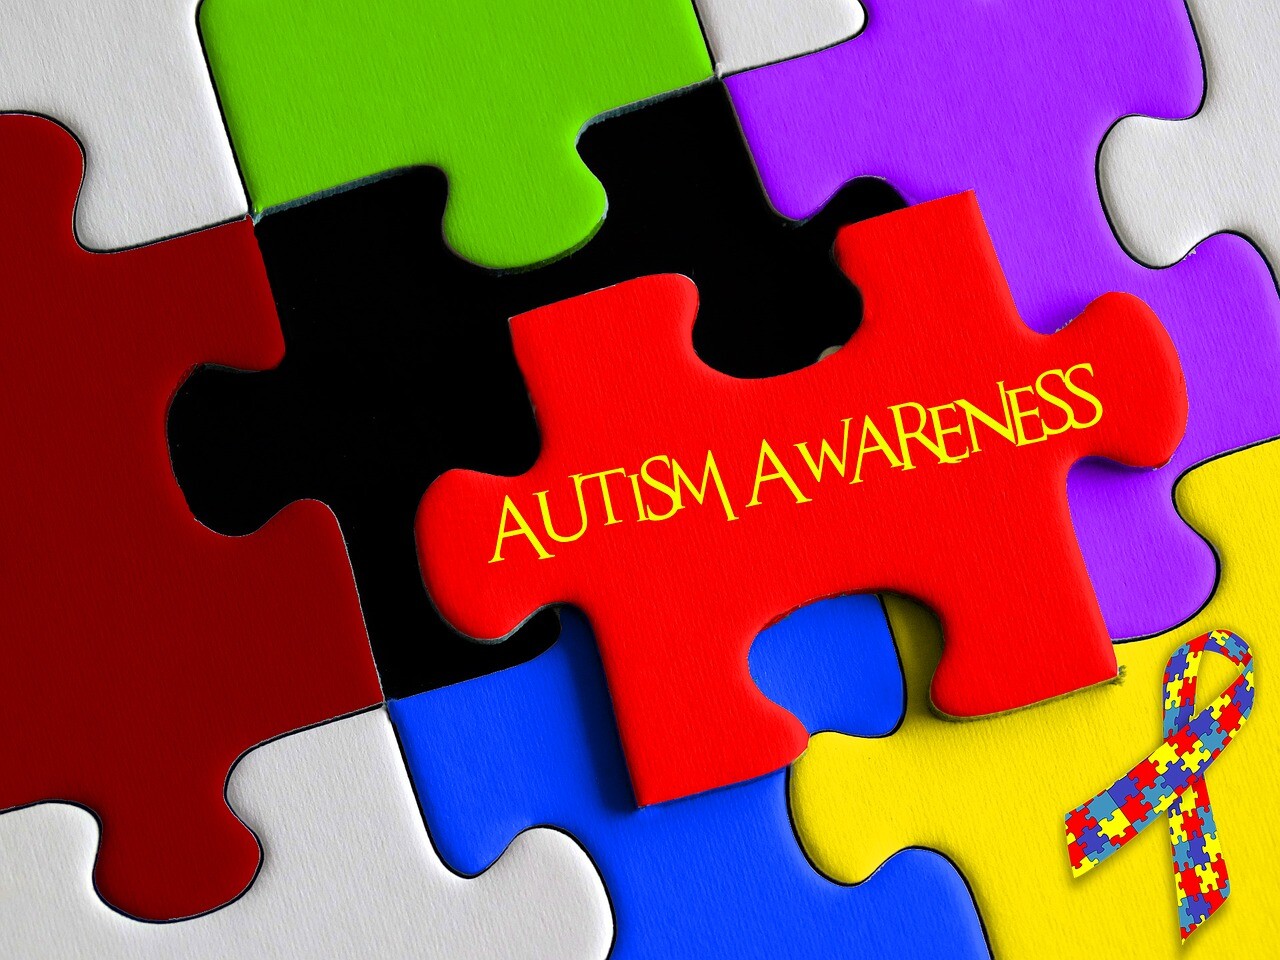 Champions Autism Network has set out to help spread autism awareness!